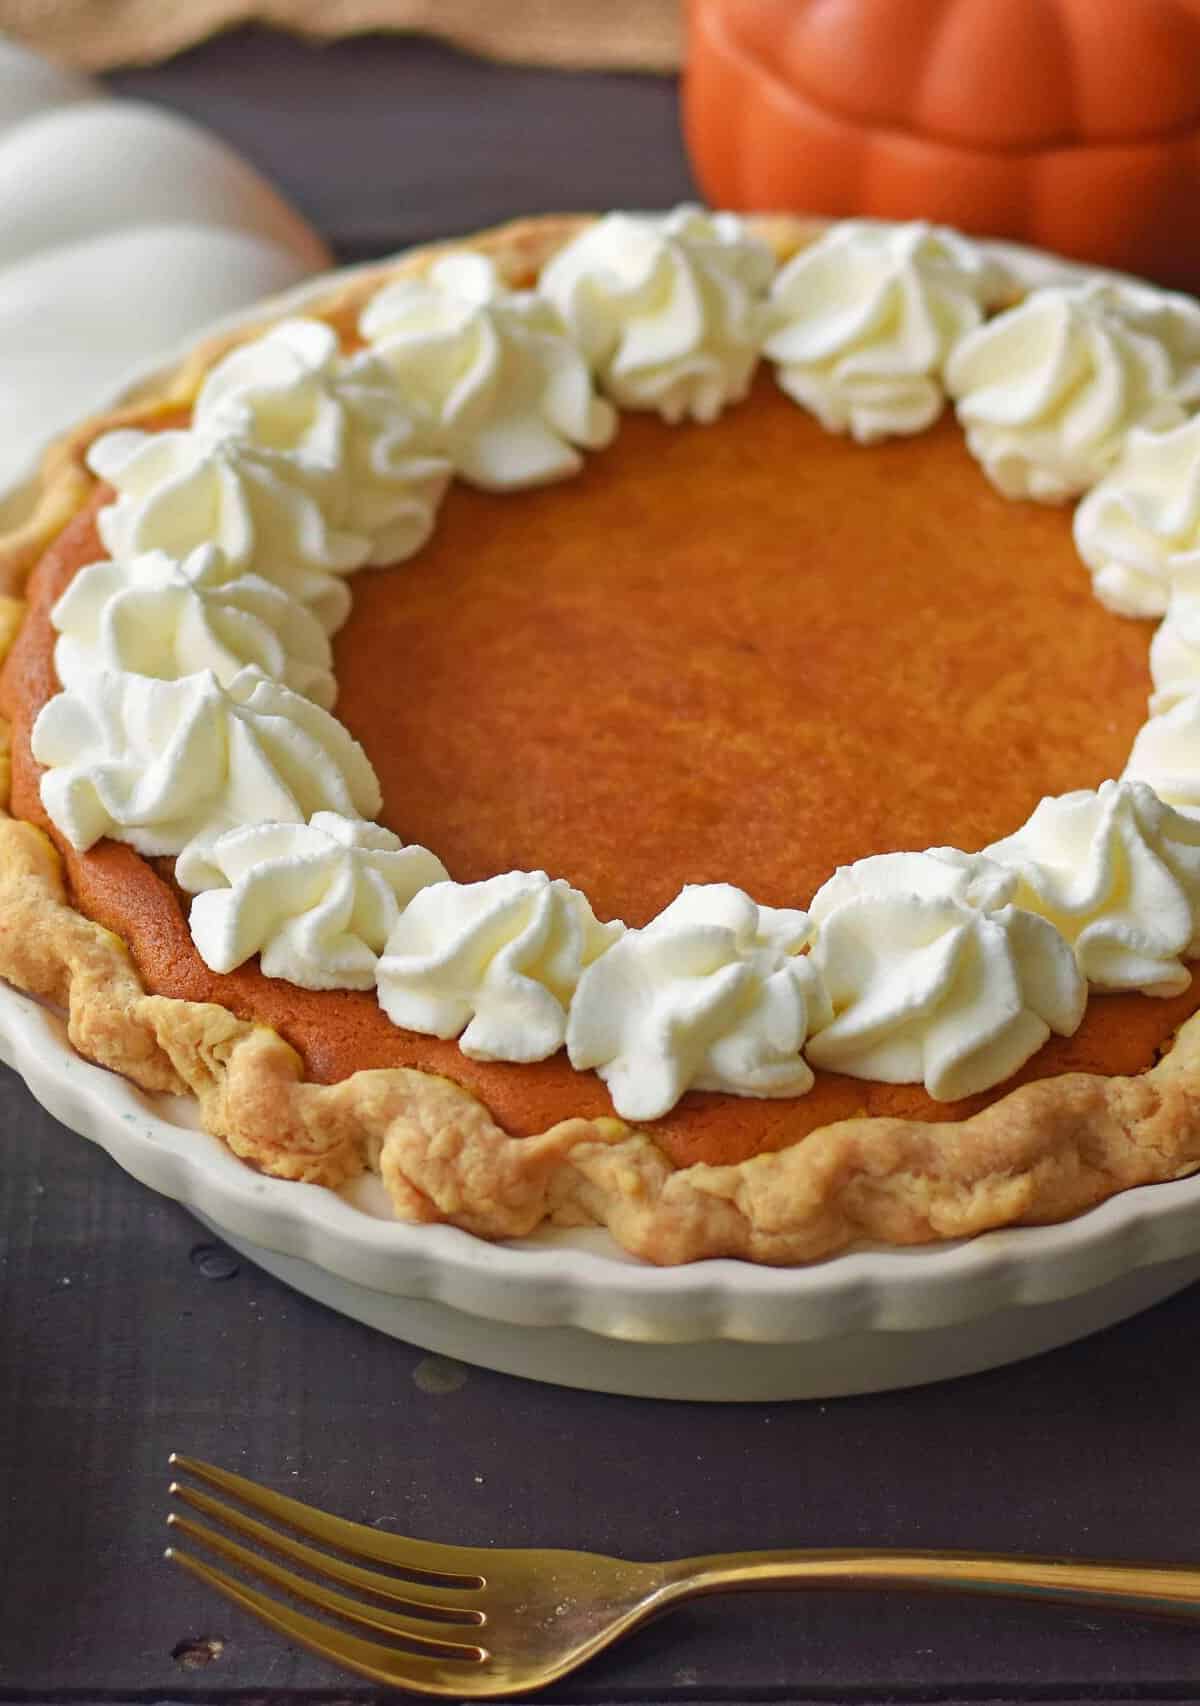  Say hello to my pumpkin pie: a crowd-pleaser for all!